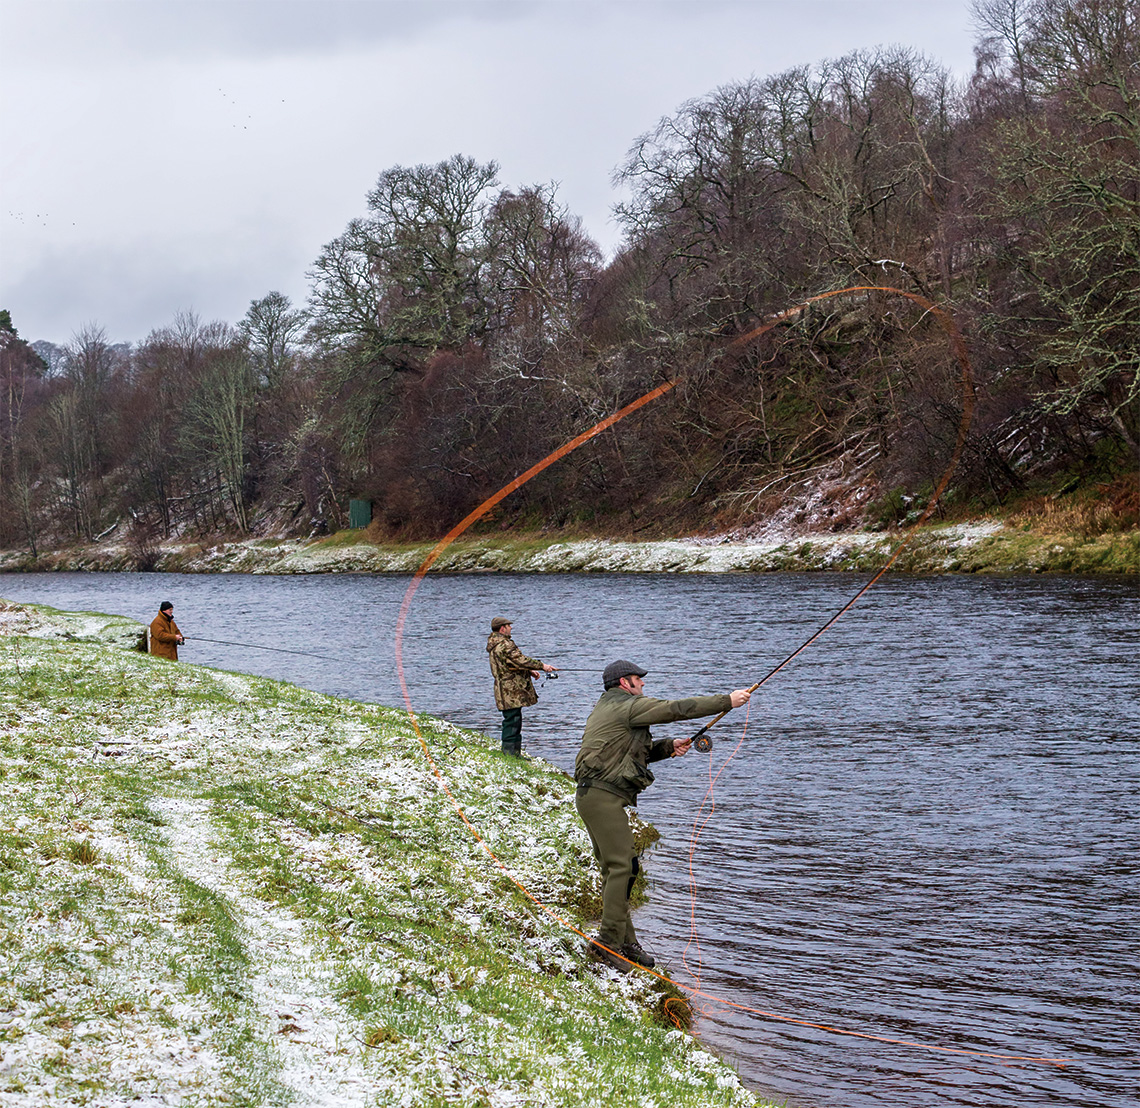 Salmon fishing the River Spey. Photography: Shutterstock / JasperImage.